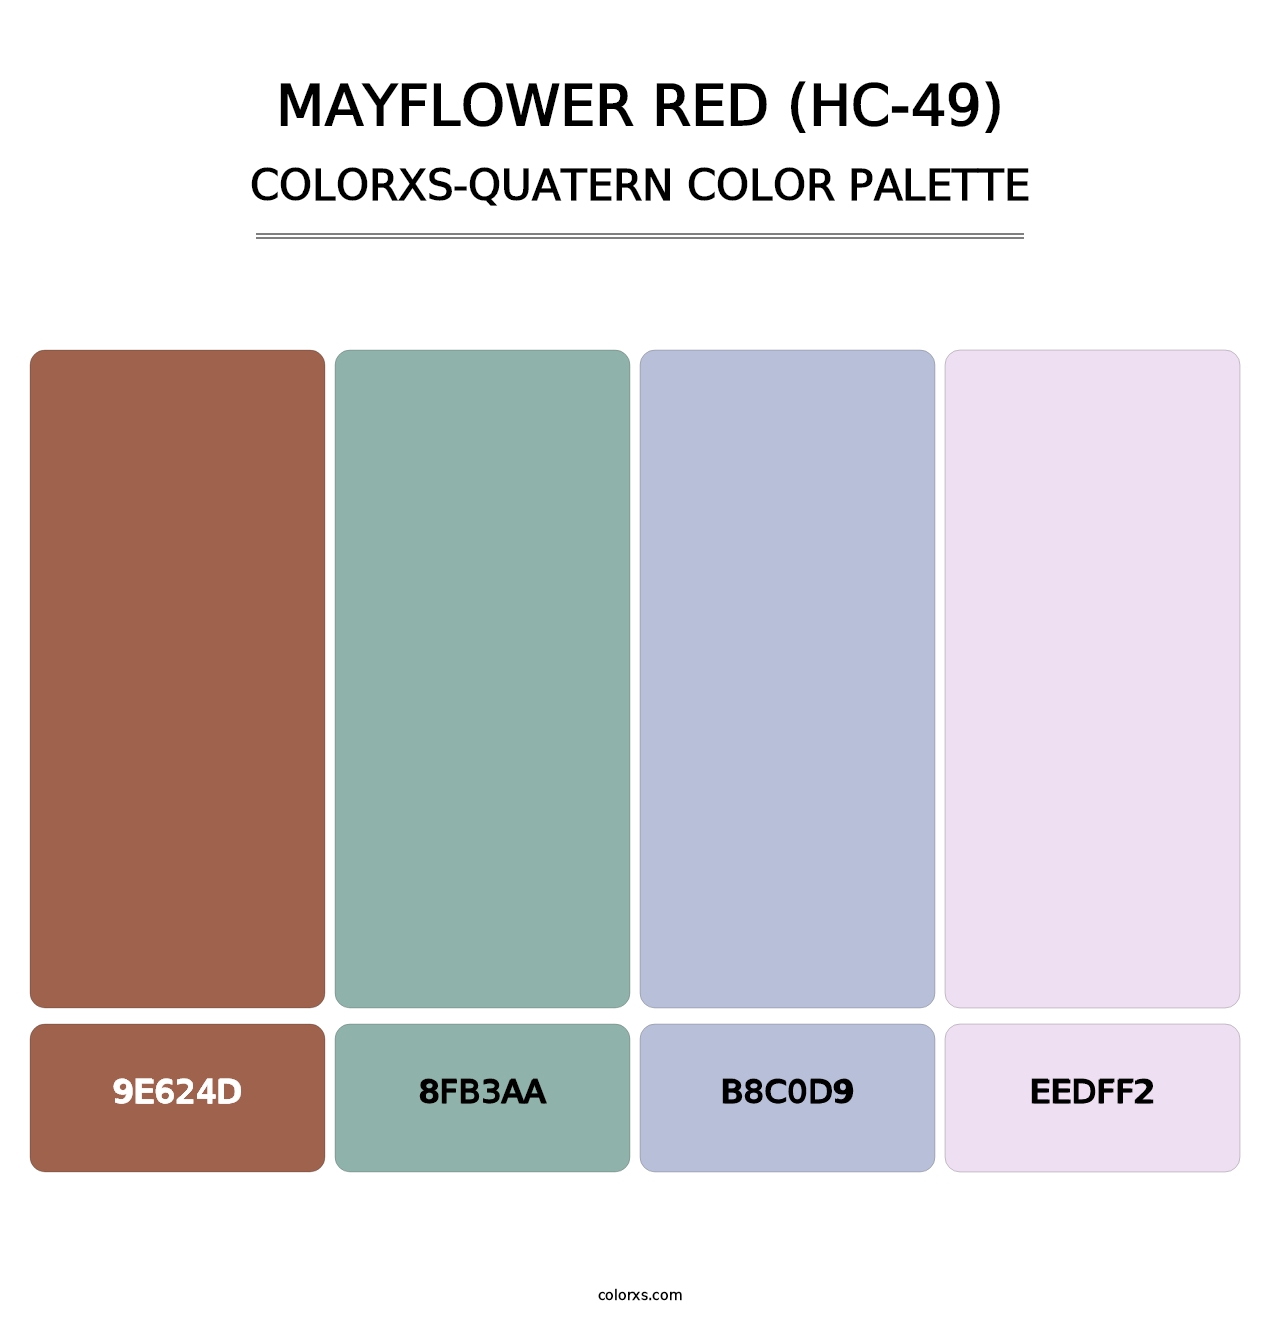 Mayflower Red (HC-49) - Colorxs Quatern Palette